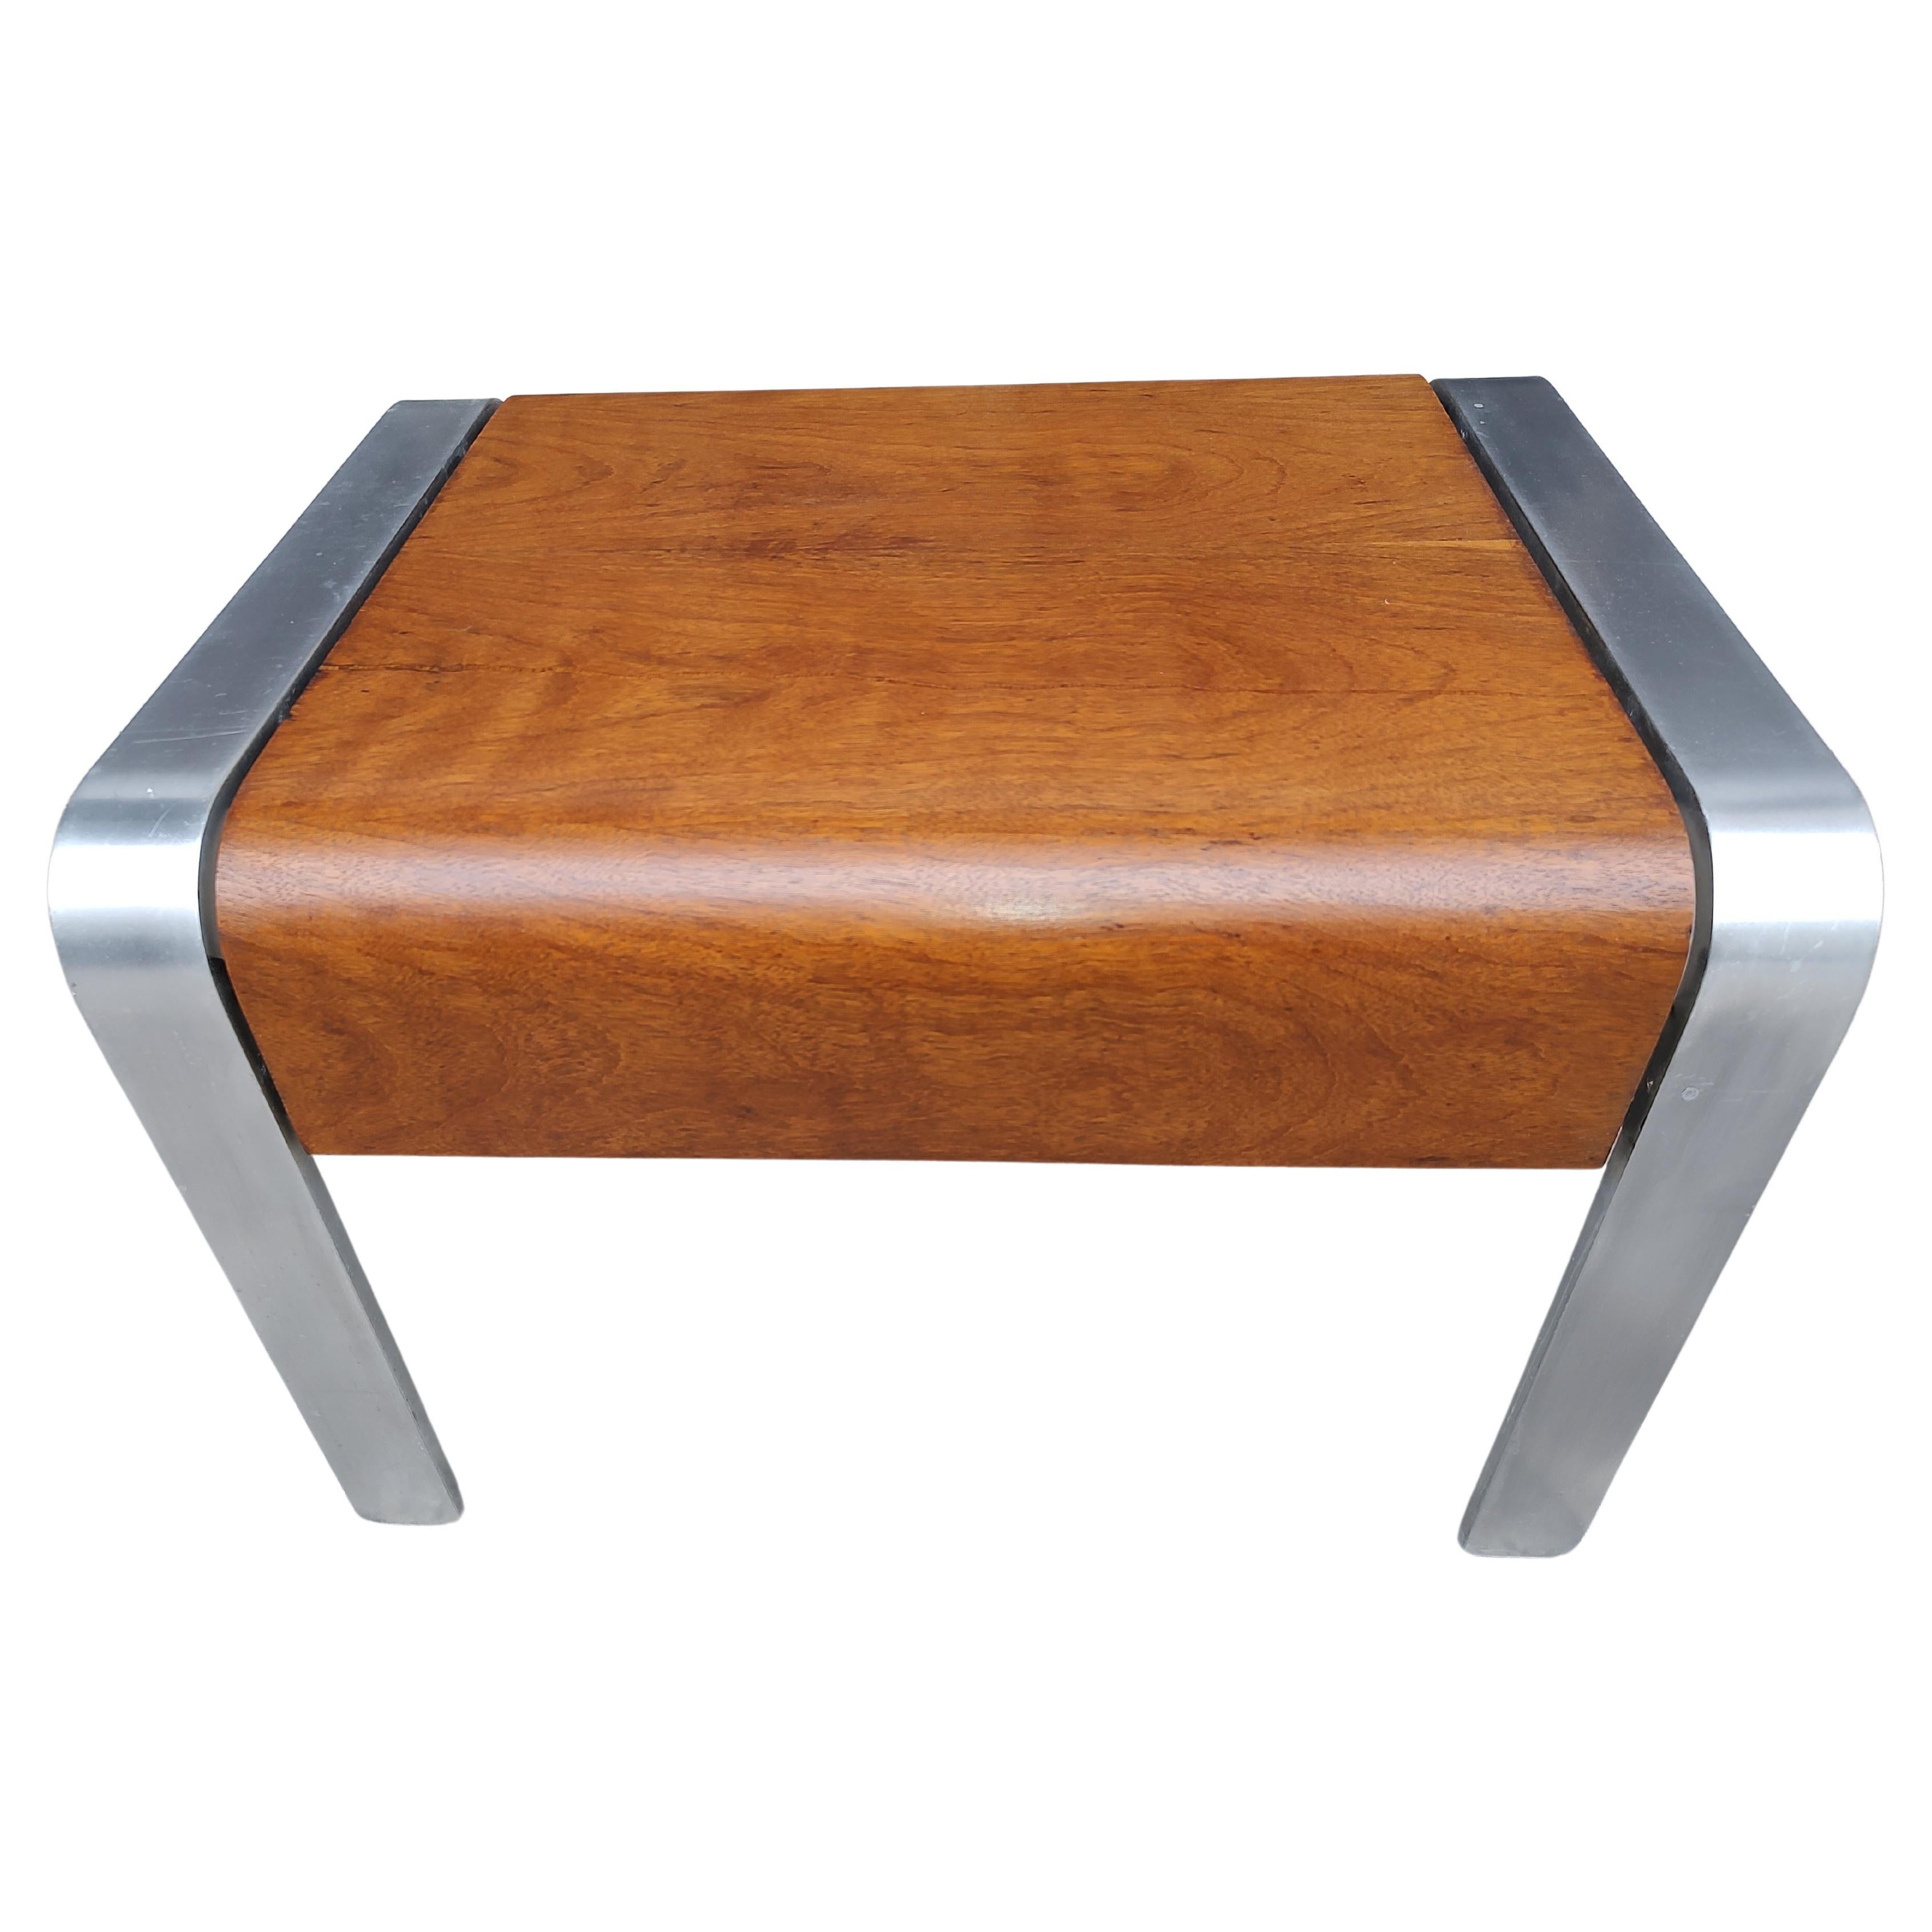 Modernist Aluminum Side Table with a Exotic Bent Wood Table Top